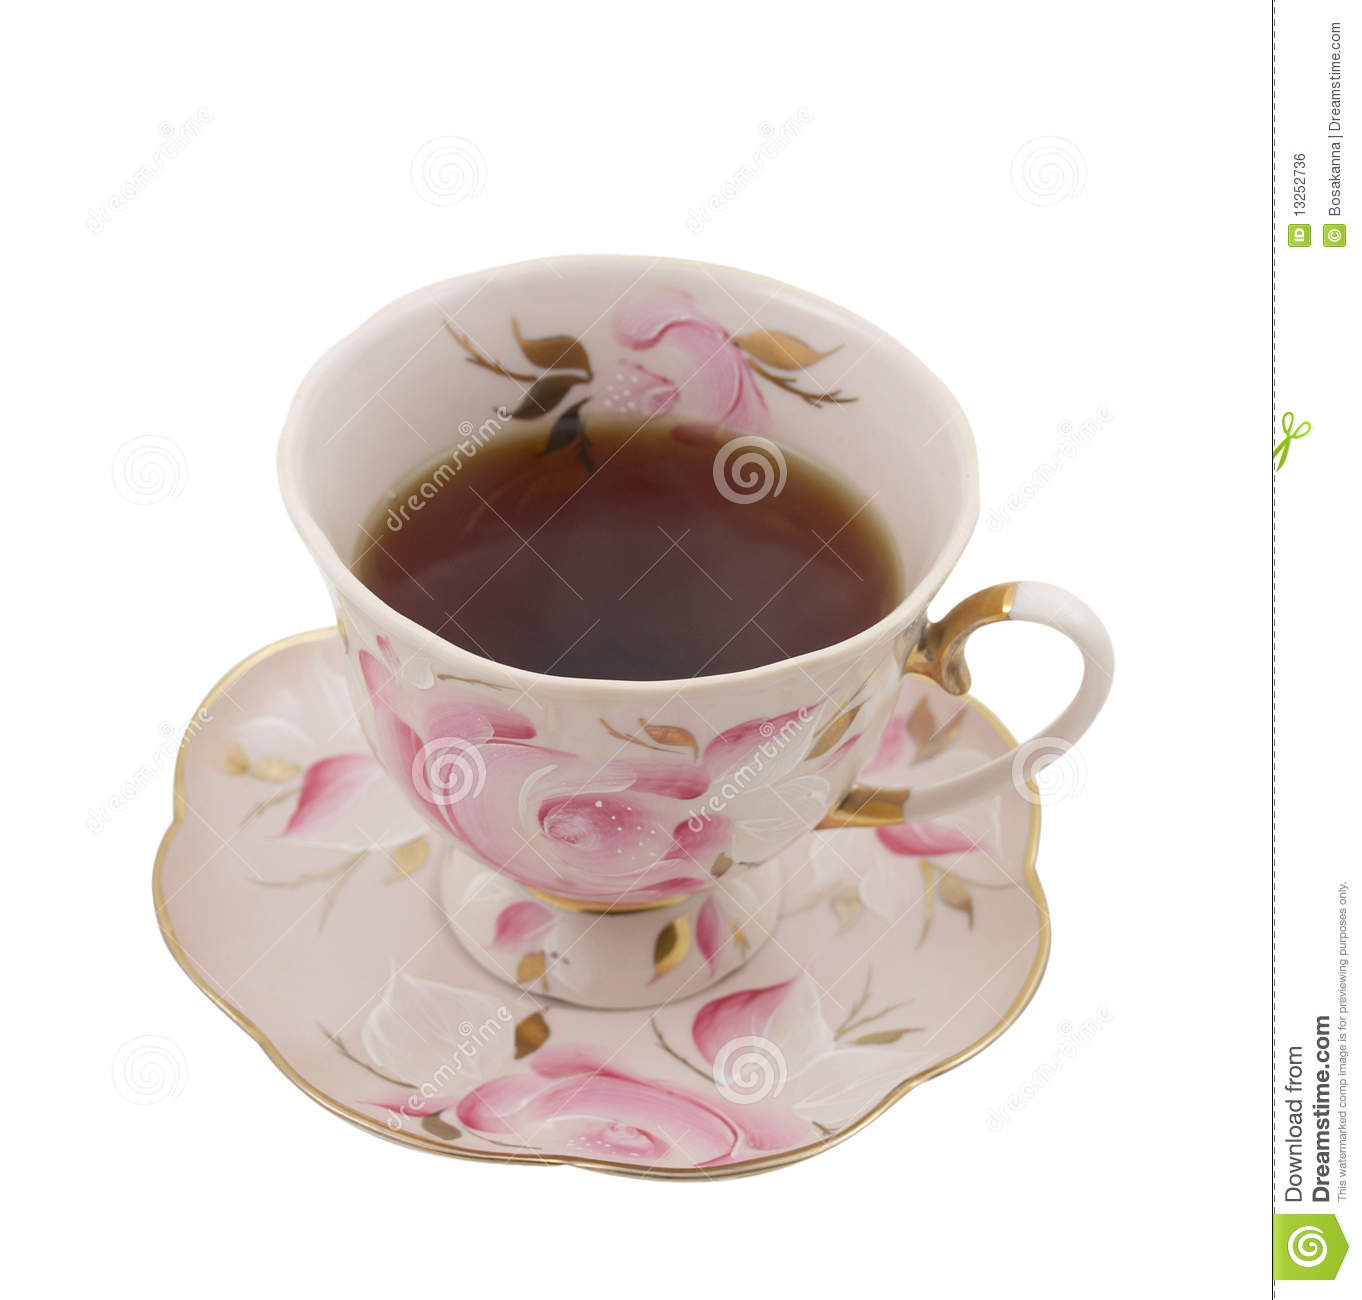 An Antique Tea Cup With A Plate Royalty Free Stock Image   Image    